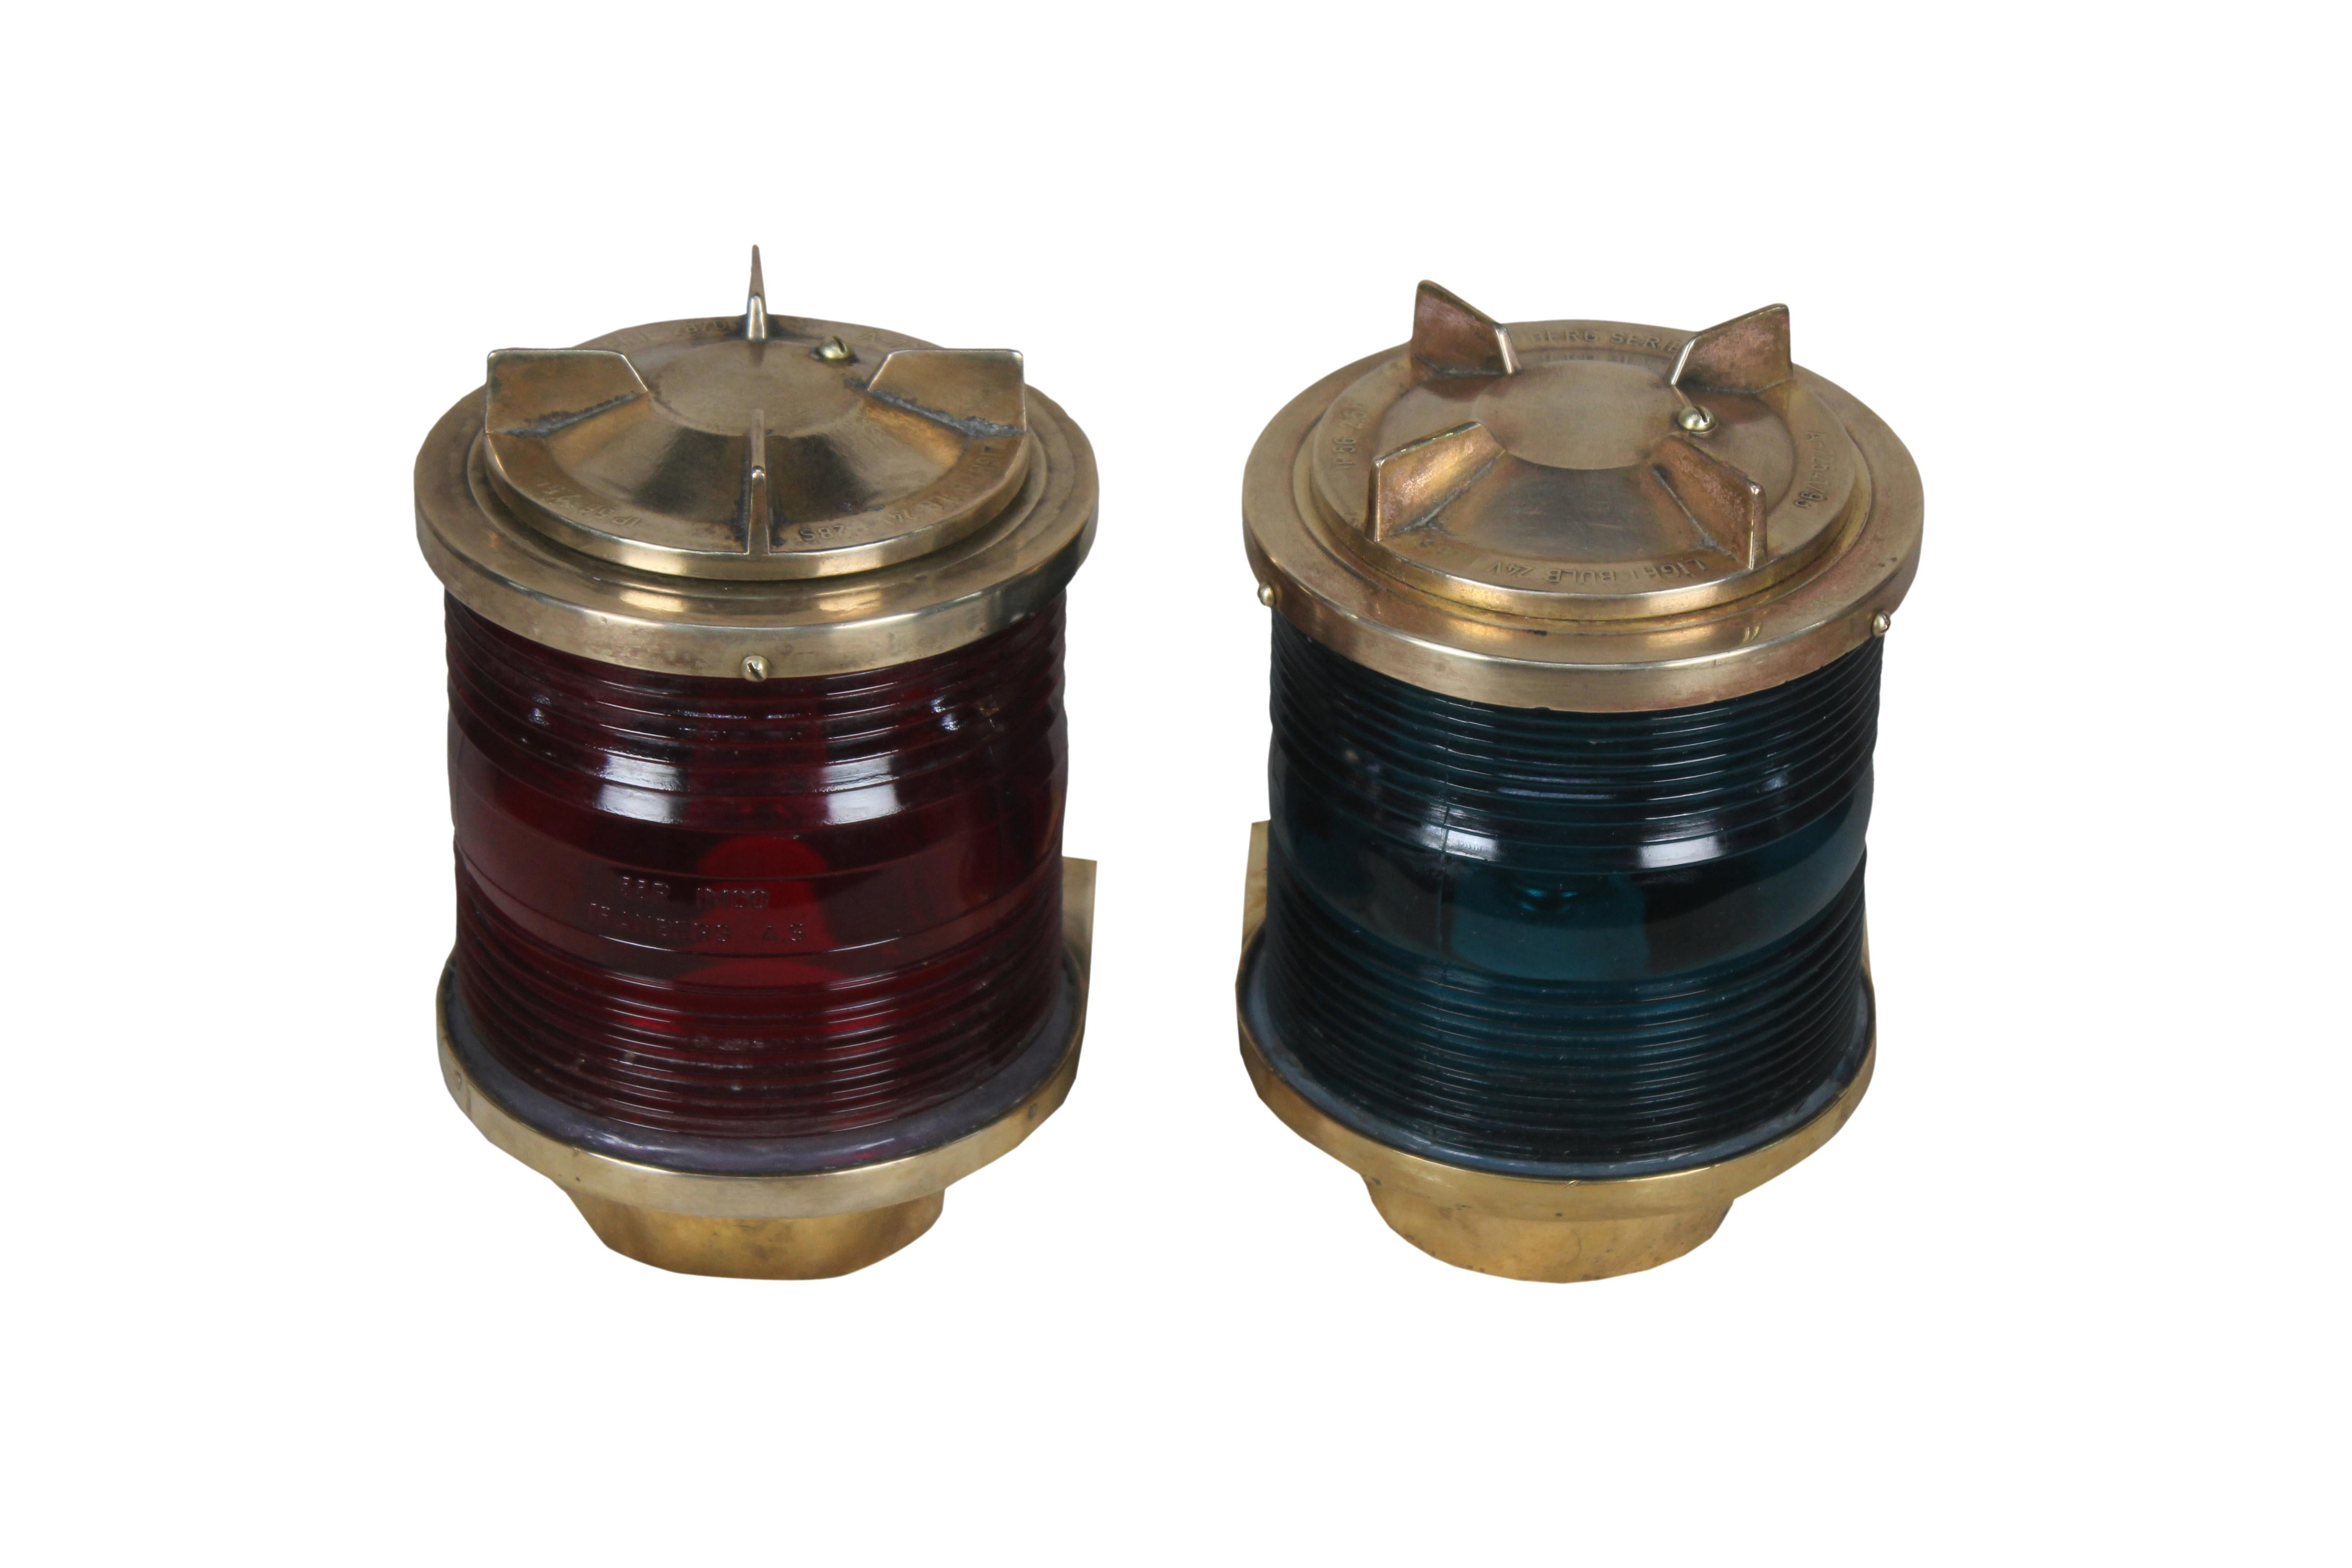 Pair of nautical port and starboard ship's navigational lights in brass with Fresnel lens. Can be wall mounted. Top portion unscrews to gain access to the bulb. It is a closed system so can be used outside. Rewired for American use and takes a